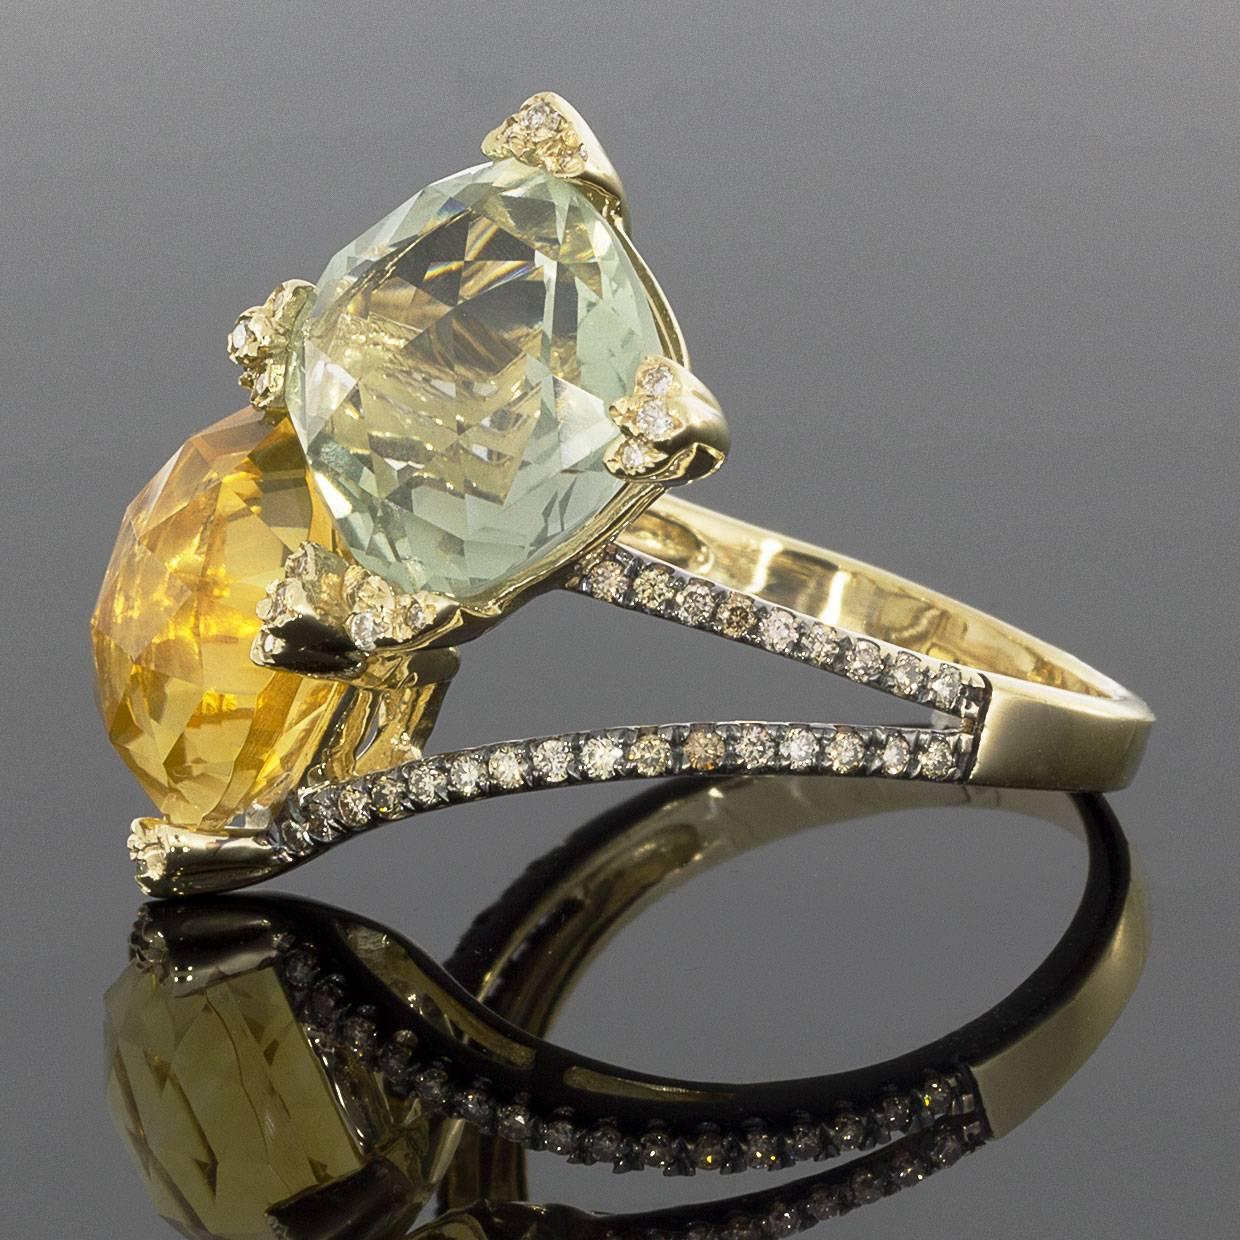 This beautiful 14K yellow gold, royal citrine, green amethyst, and diamond ring is sure to wow! This ring features a cushion cut green amethyst and a cushion cut royale citrine with checkerboard faceting. The gemstones are held in place by clover